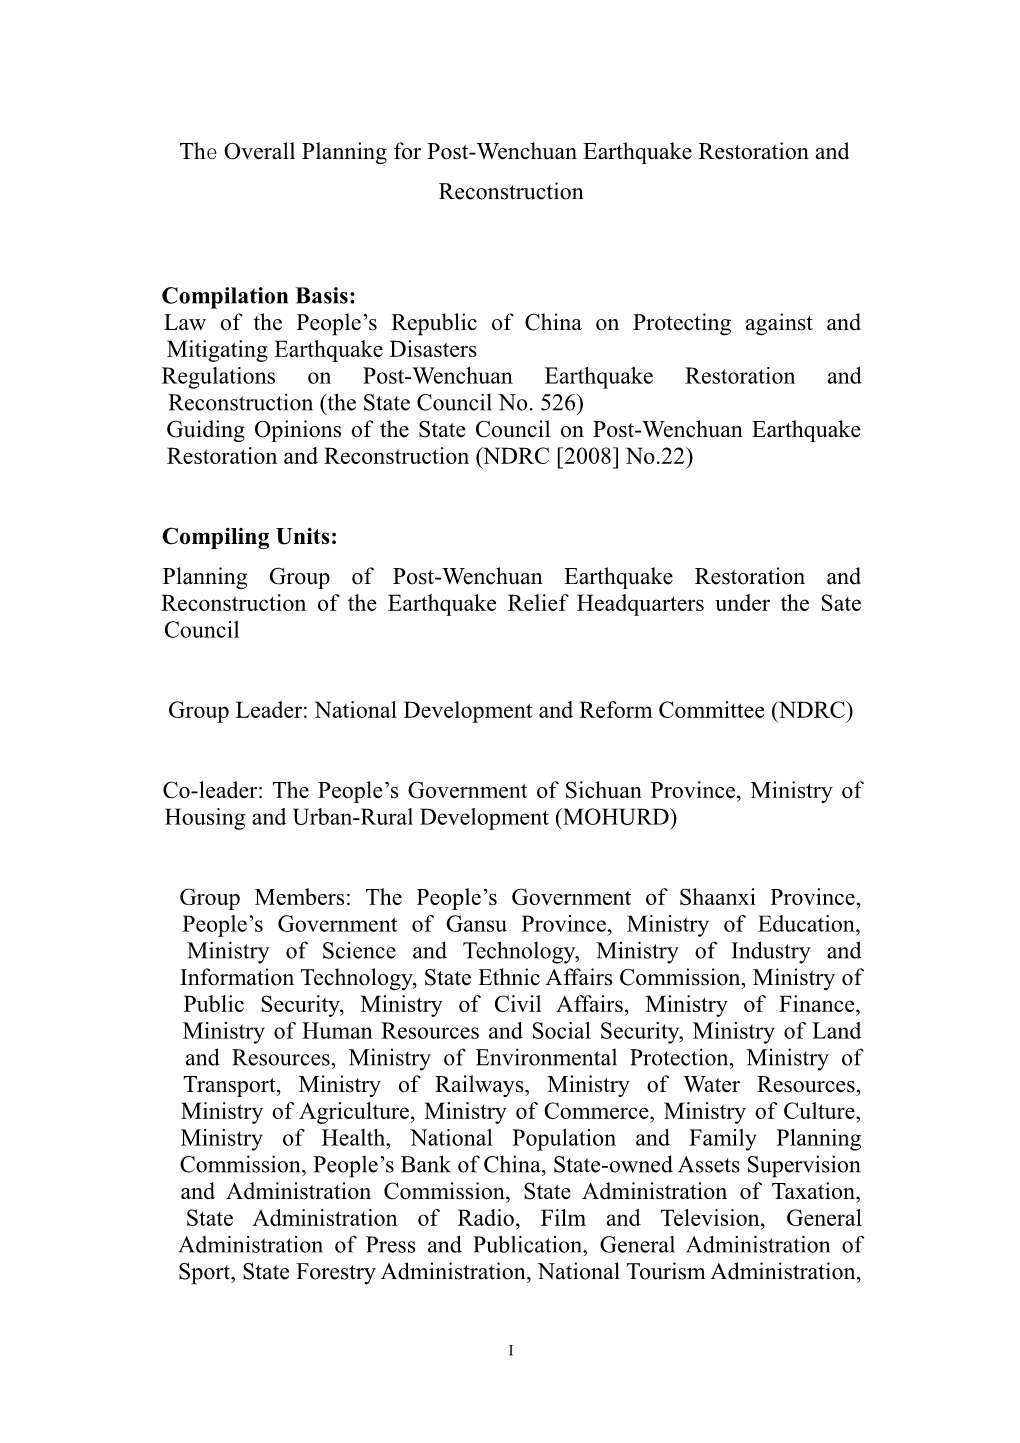 The Overall Planningfor Post-Wenchuan Earthquake Restoration and Reconstruction